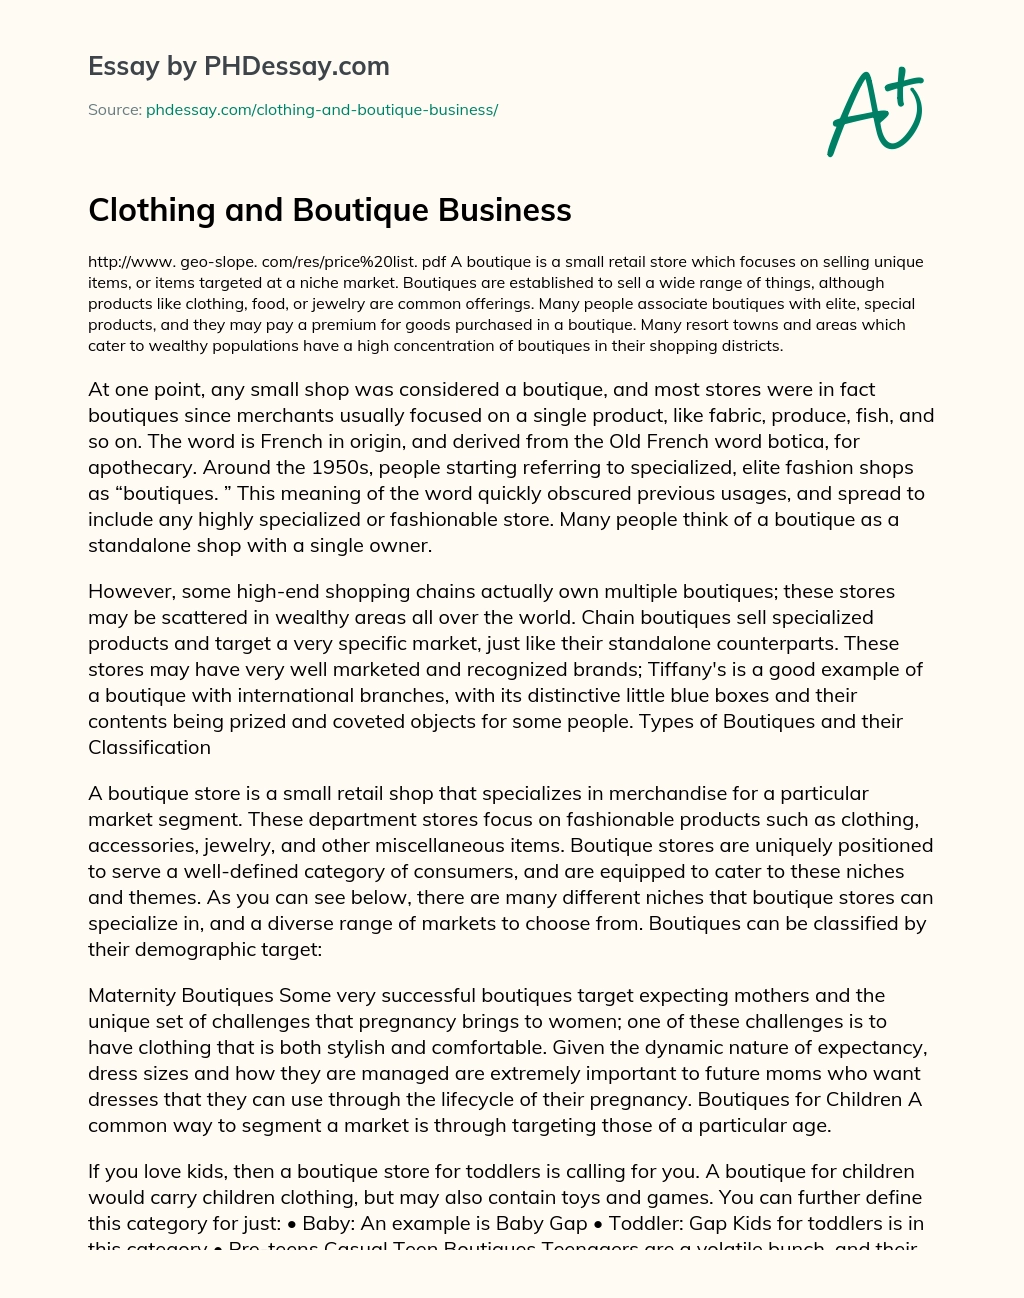 Clothing and Boutique Business essay